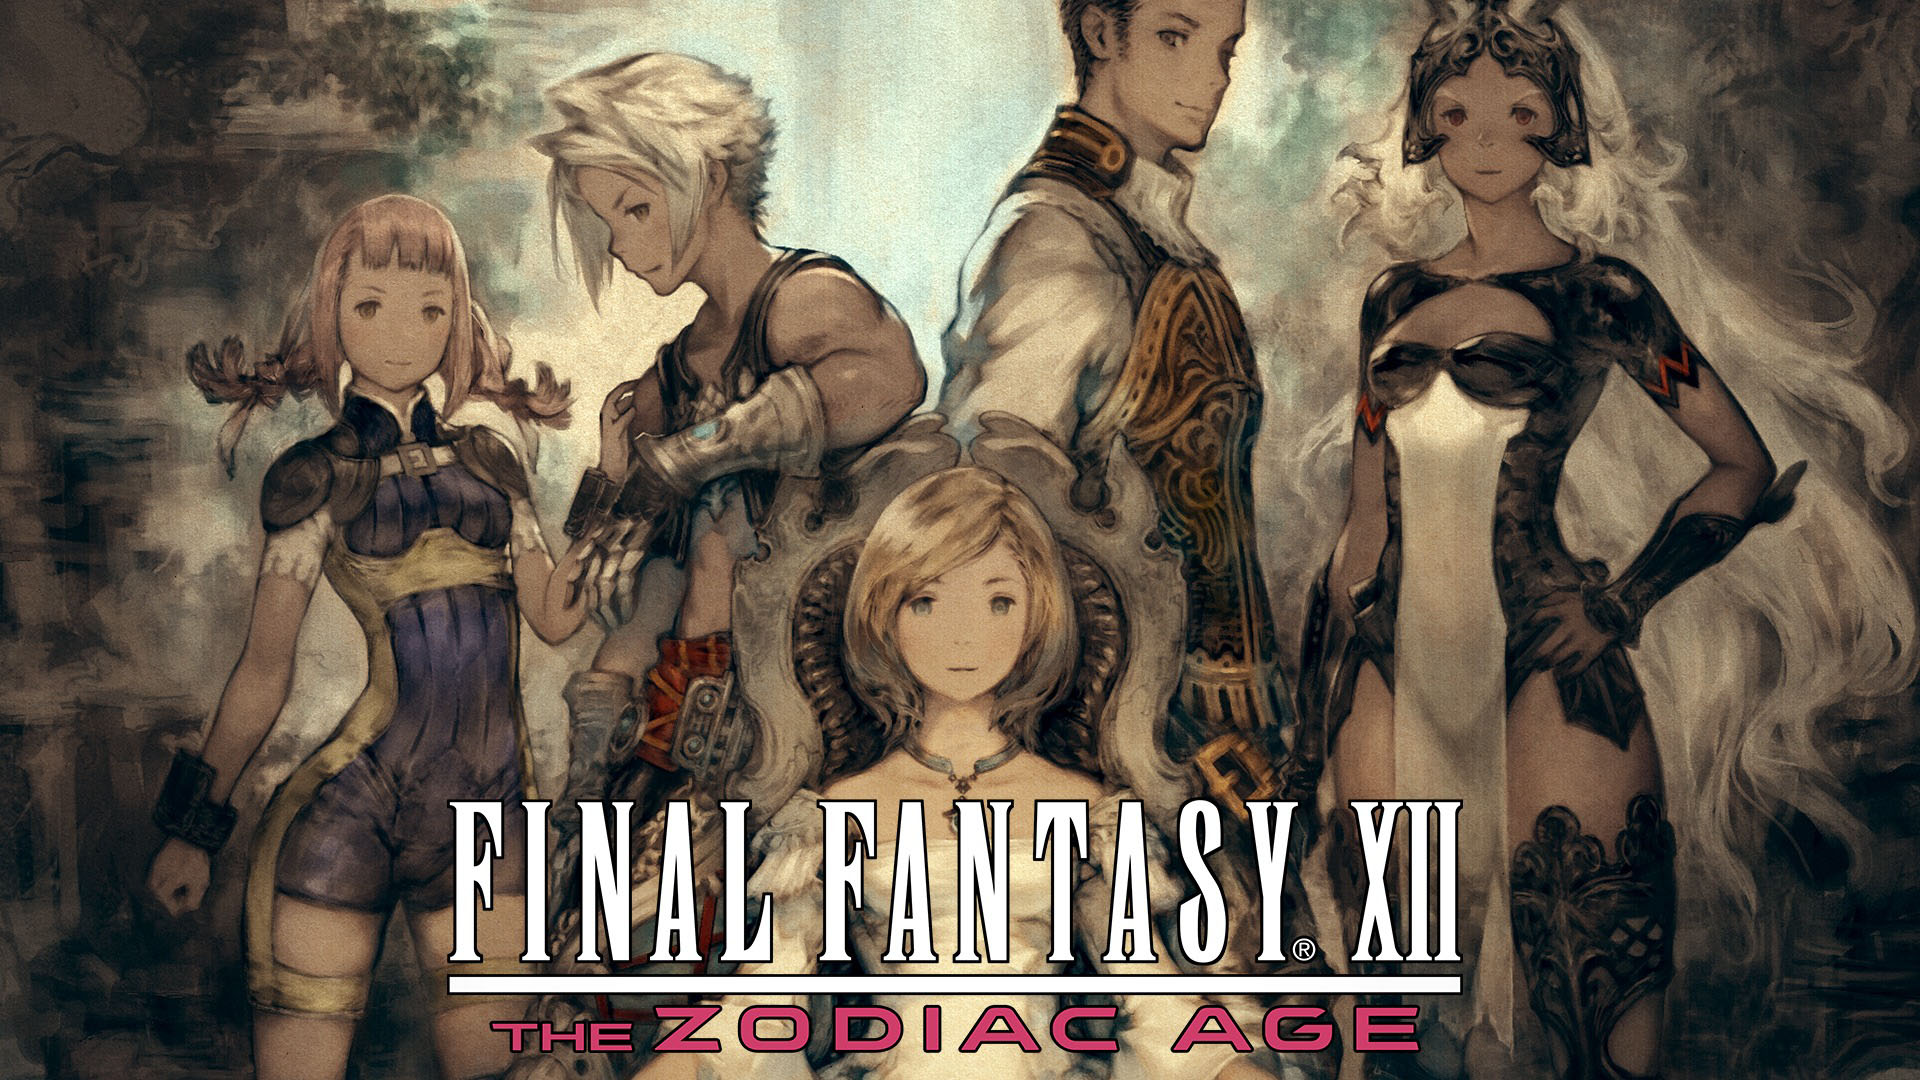 Final Fantasy XII is a role-playing video game developed and published by Square Enix. The twelfth main installment of the Final Fantasy series, it wa...